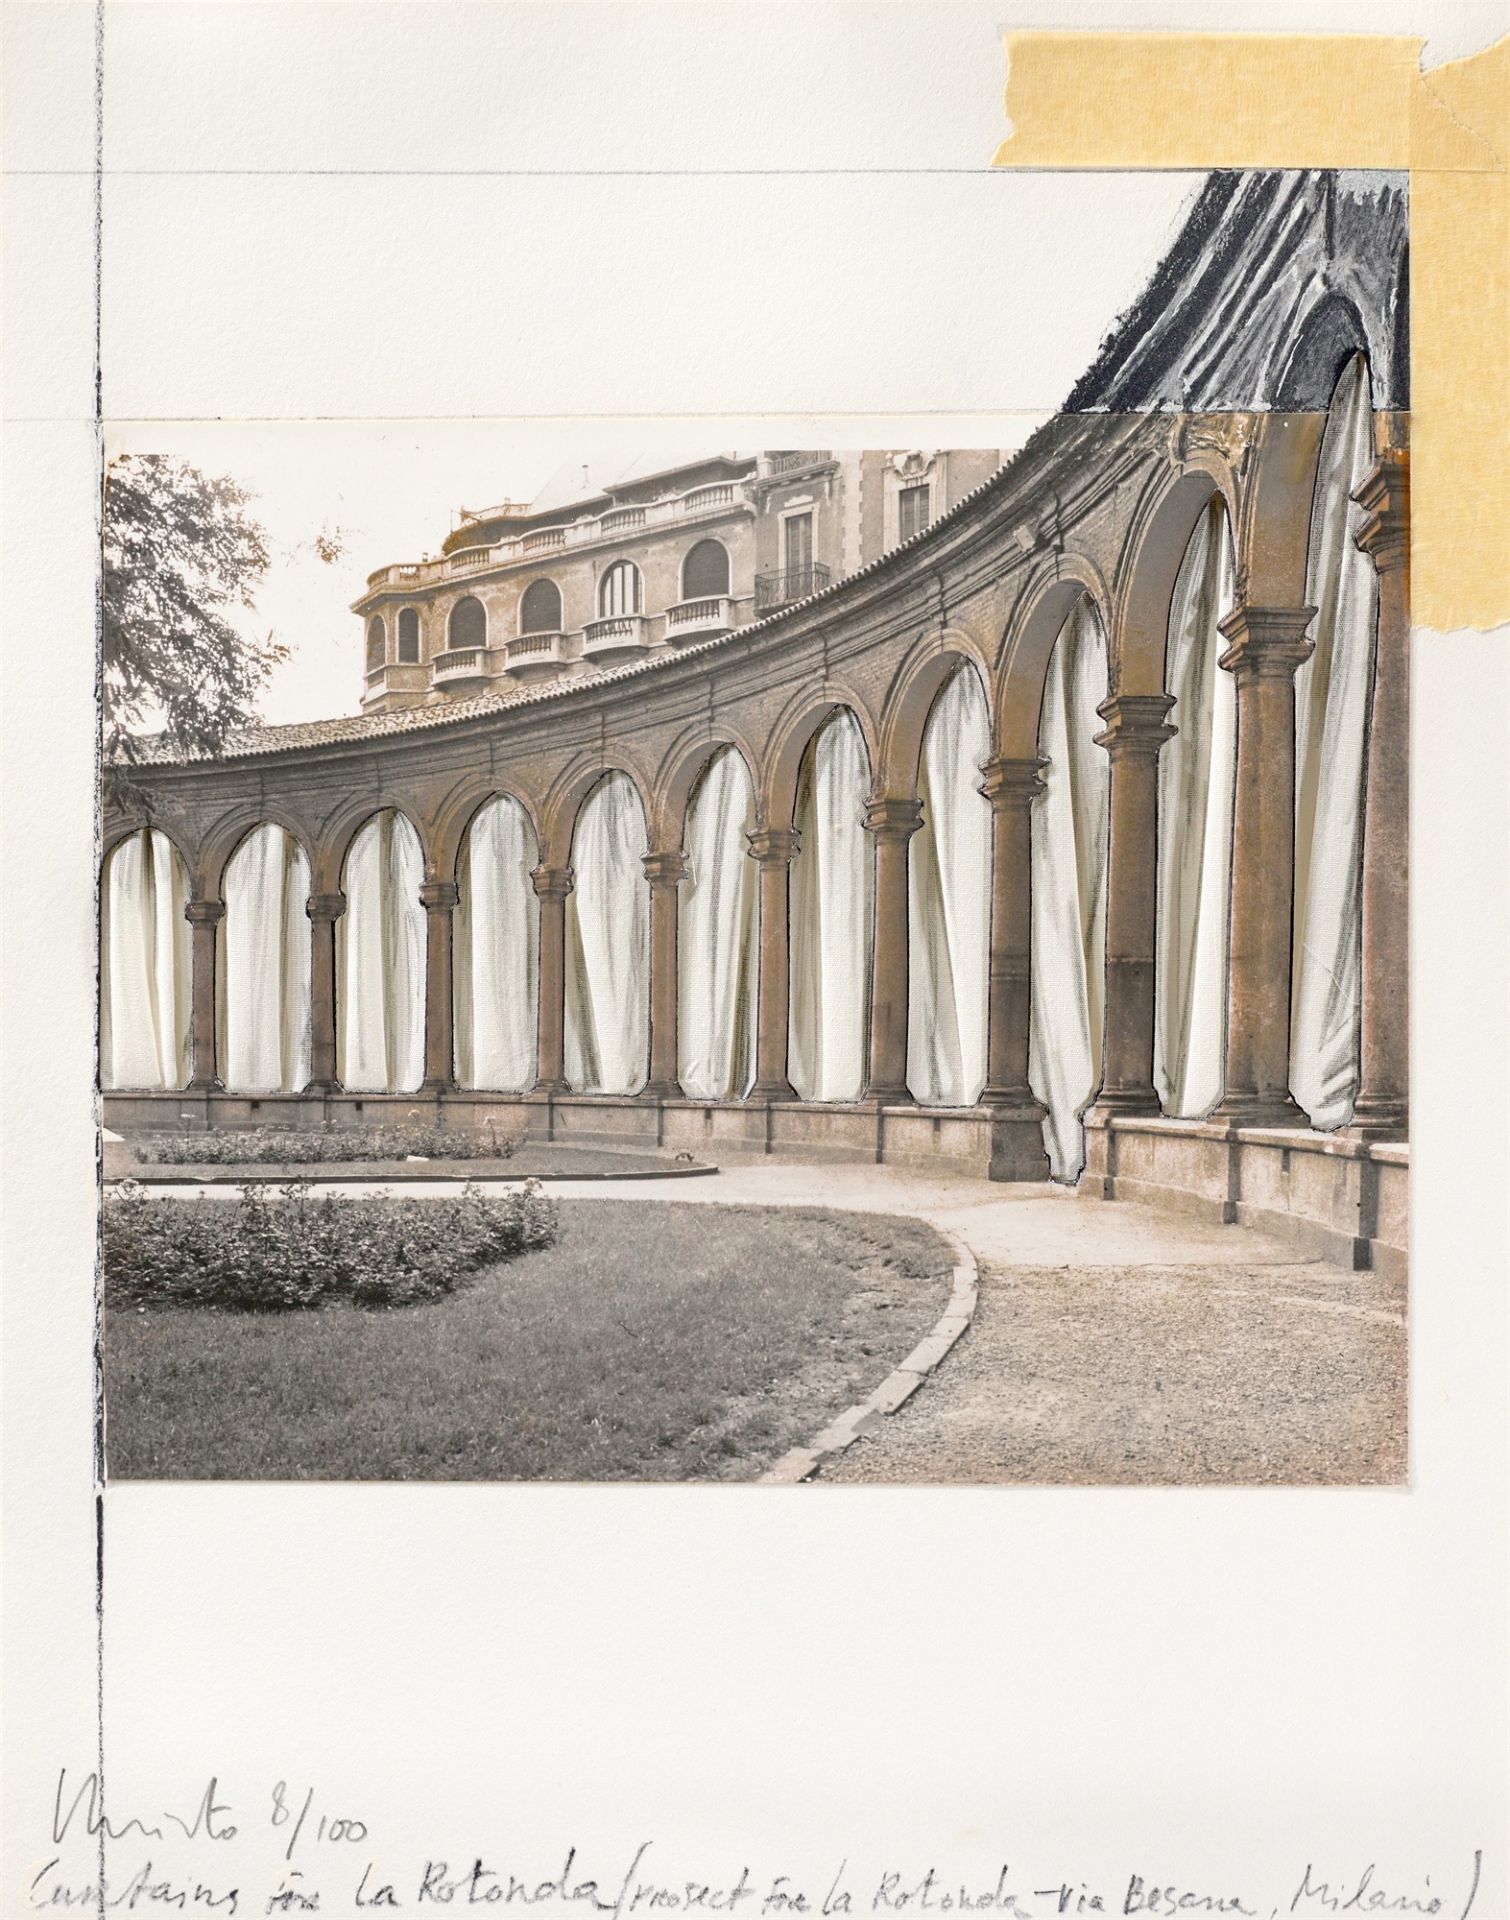 Christo. ”5 Urban Projects”. 1985 - Image 4 of 5